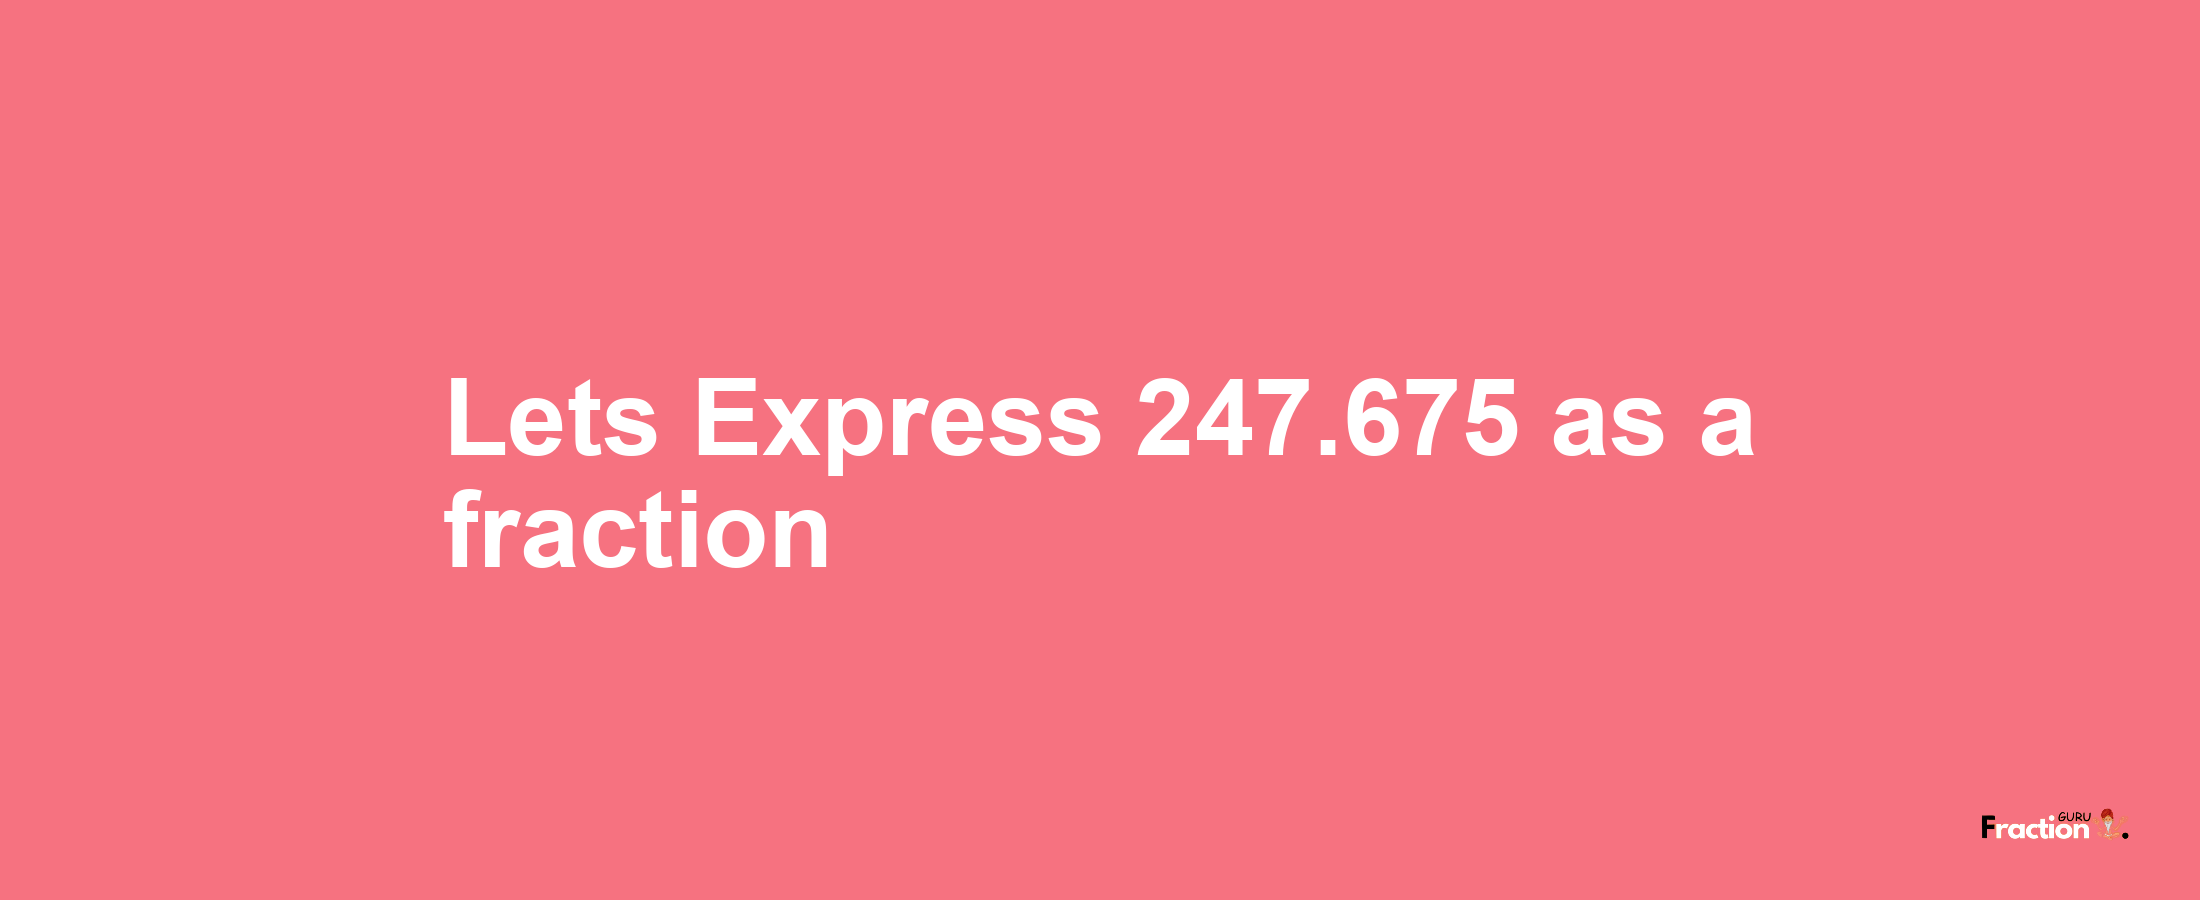 Lets Express 247.675 as afraction